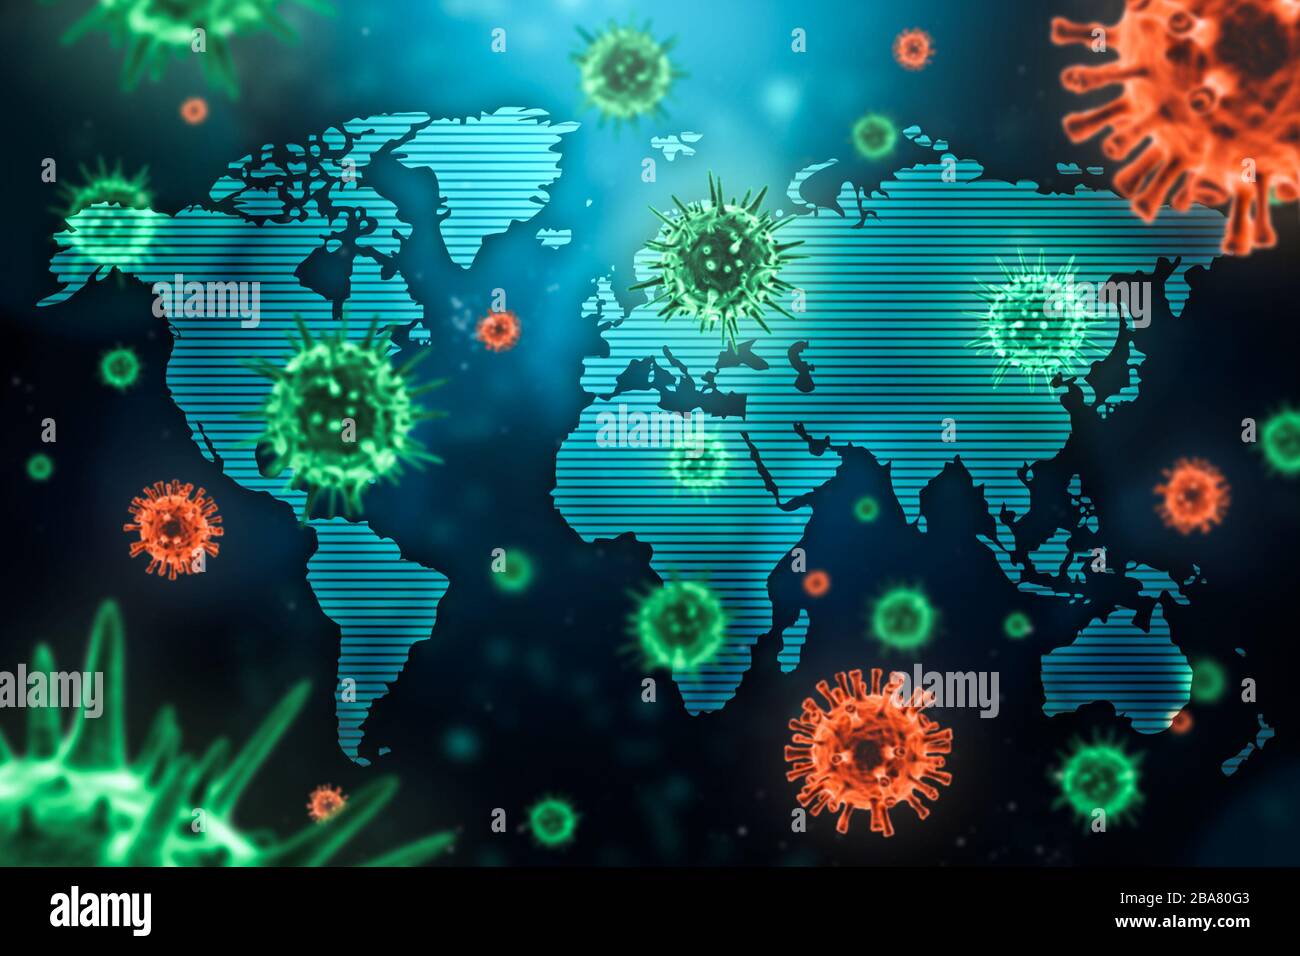 Viral epidemic or pandemic spreading around the world concept with microscopic virus cells and the world map. Healthcare, medical, global contagion an Stock Photo